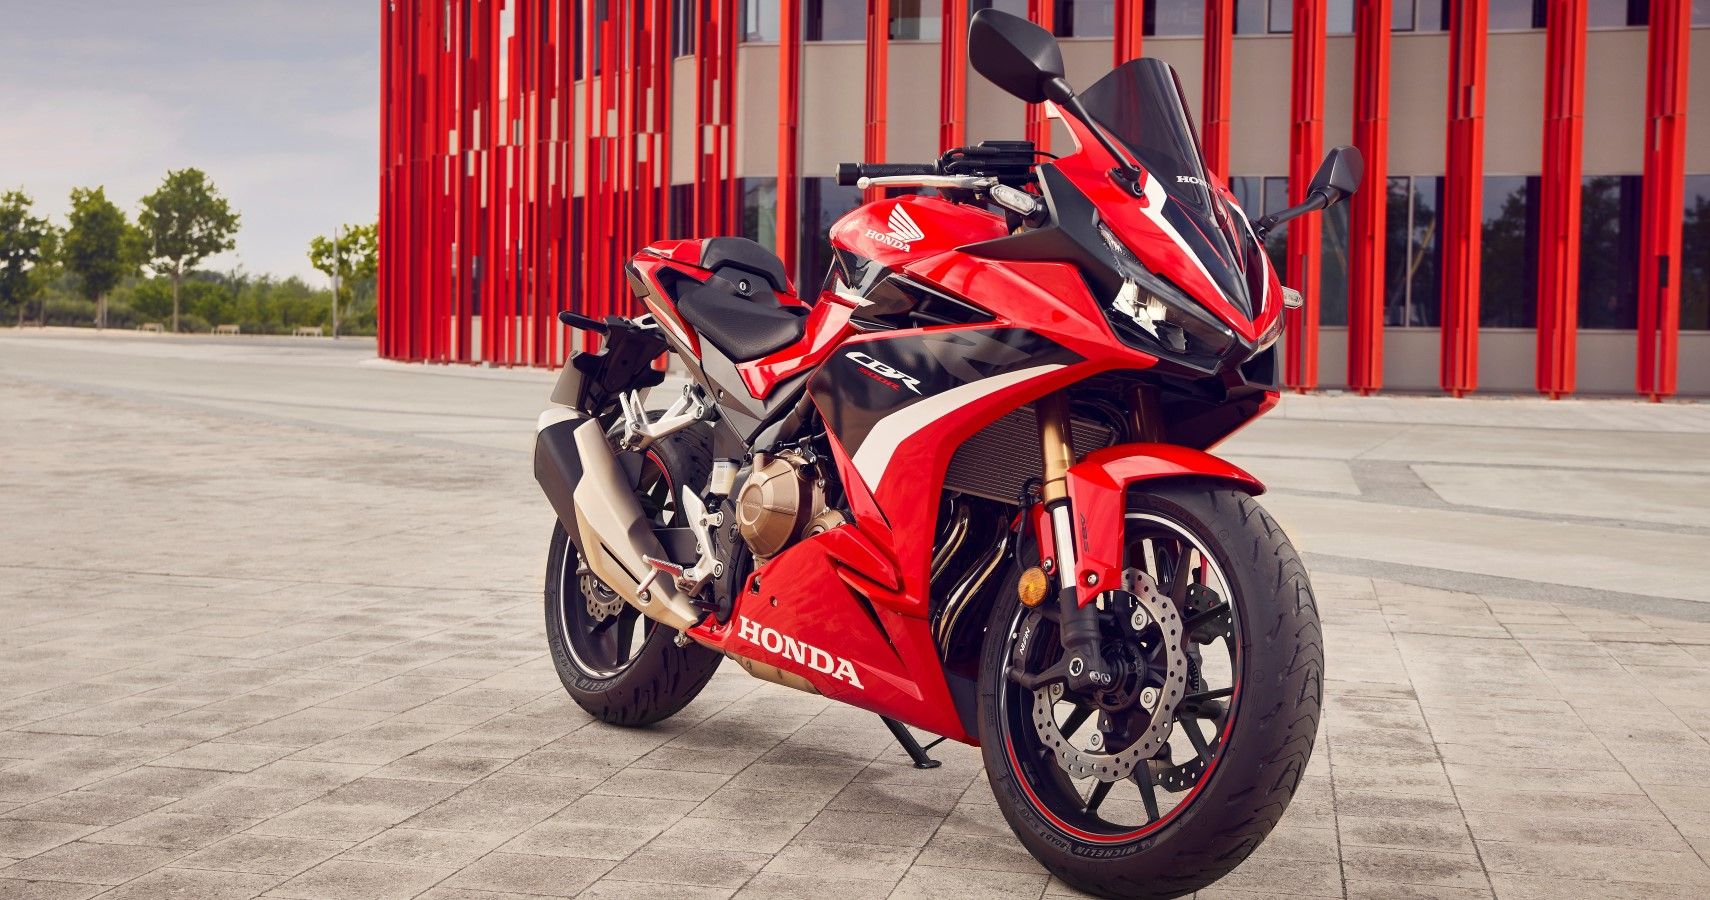 The Baby Blade Everything You Need To Know About The 2022 Honda CBR500R